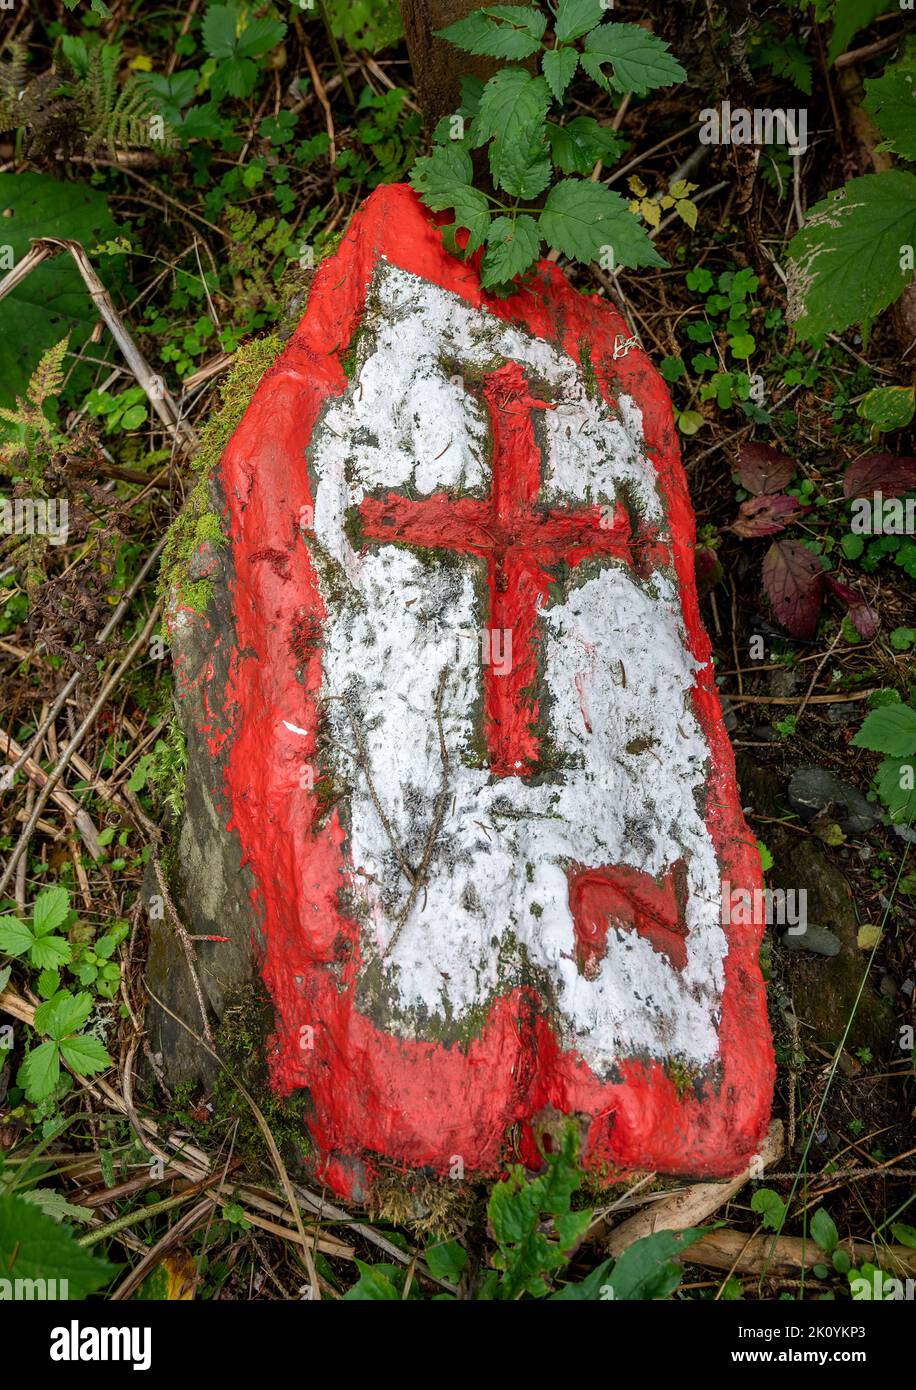 border stone with red cross on white background lying in the undergrowth on forest soil, Austria Stock Photo